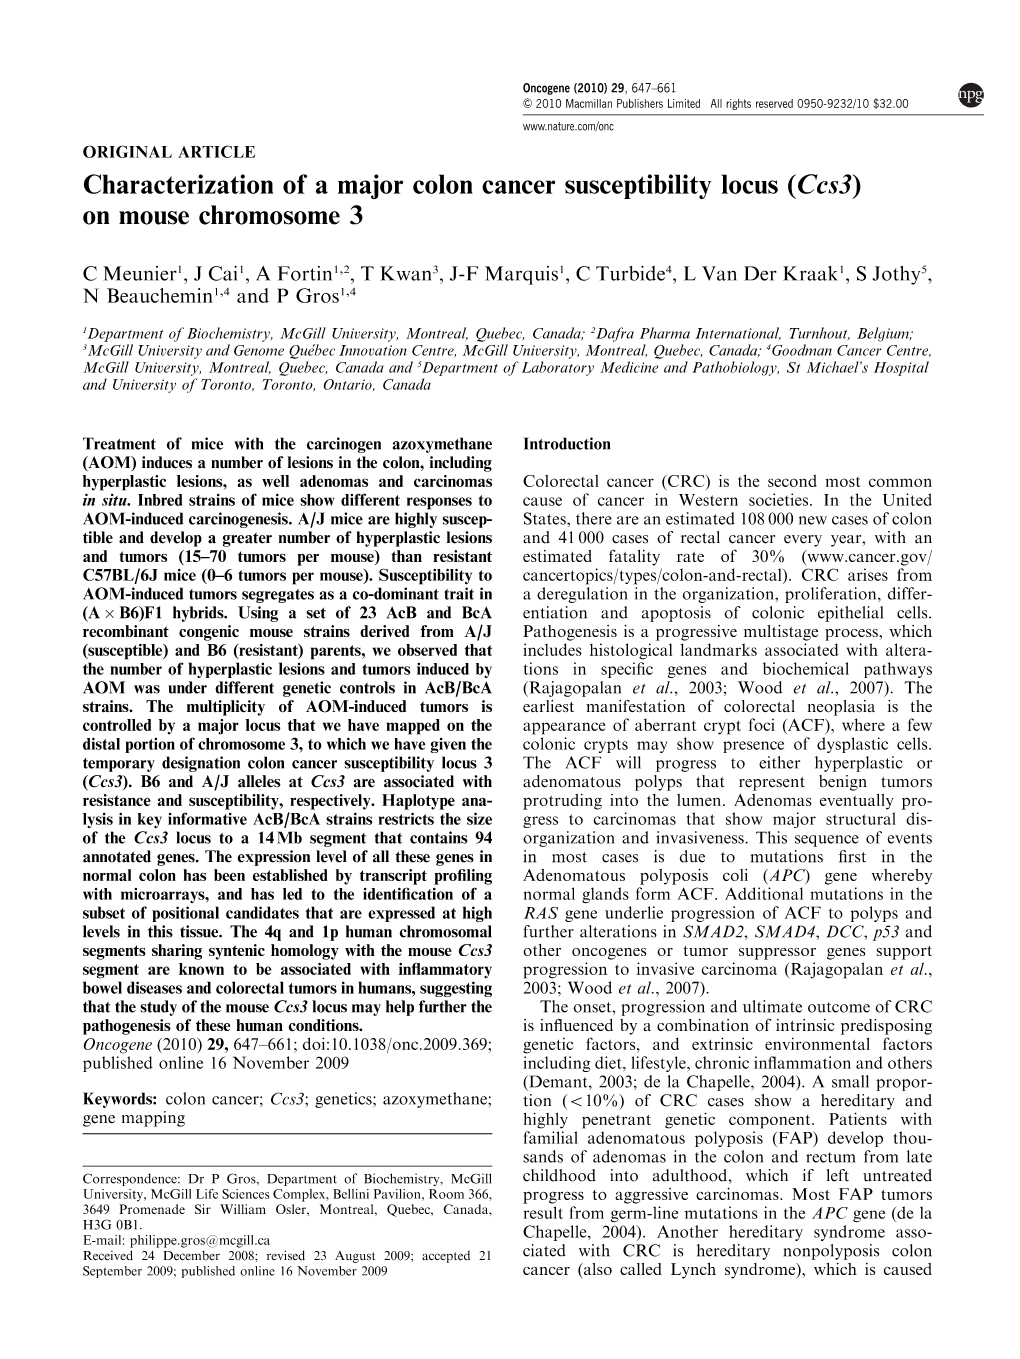 Characterization of a Major Colon Cancer Susceptibility Locus (Ccs3) on Mouse Chromosome 3